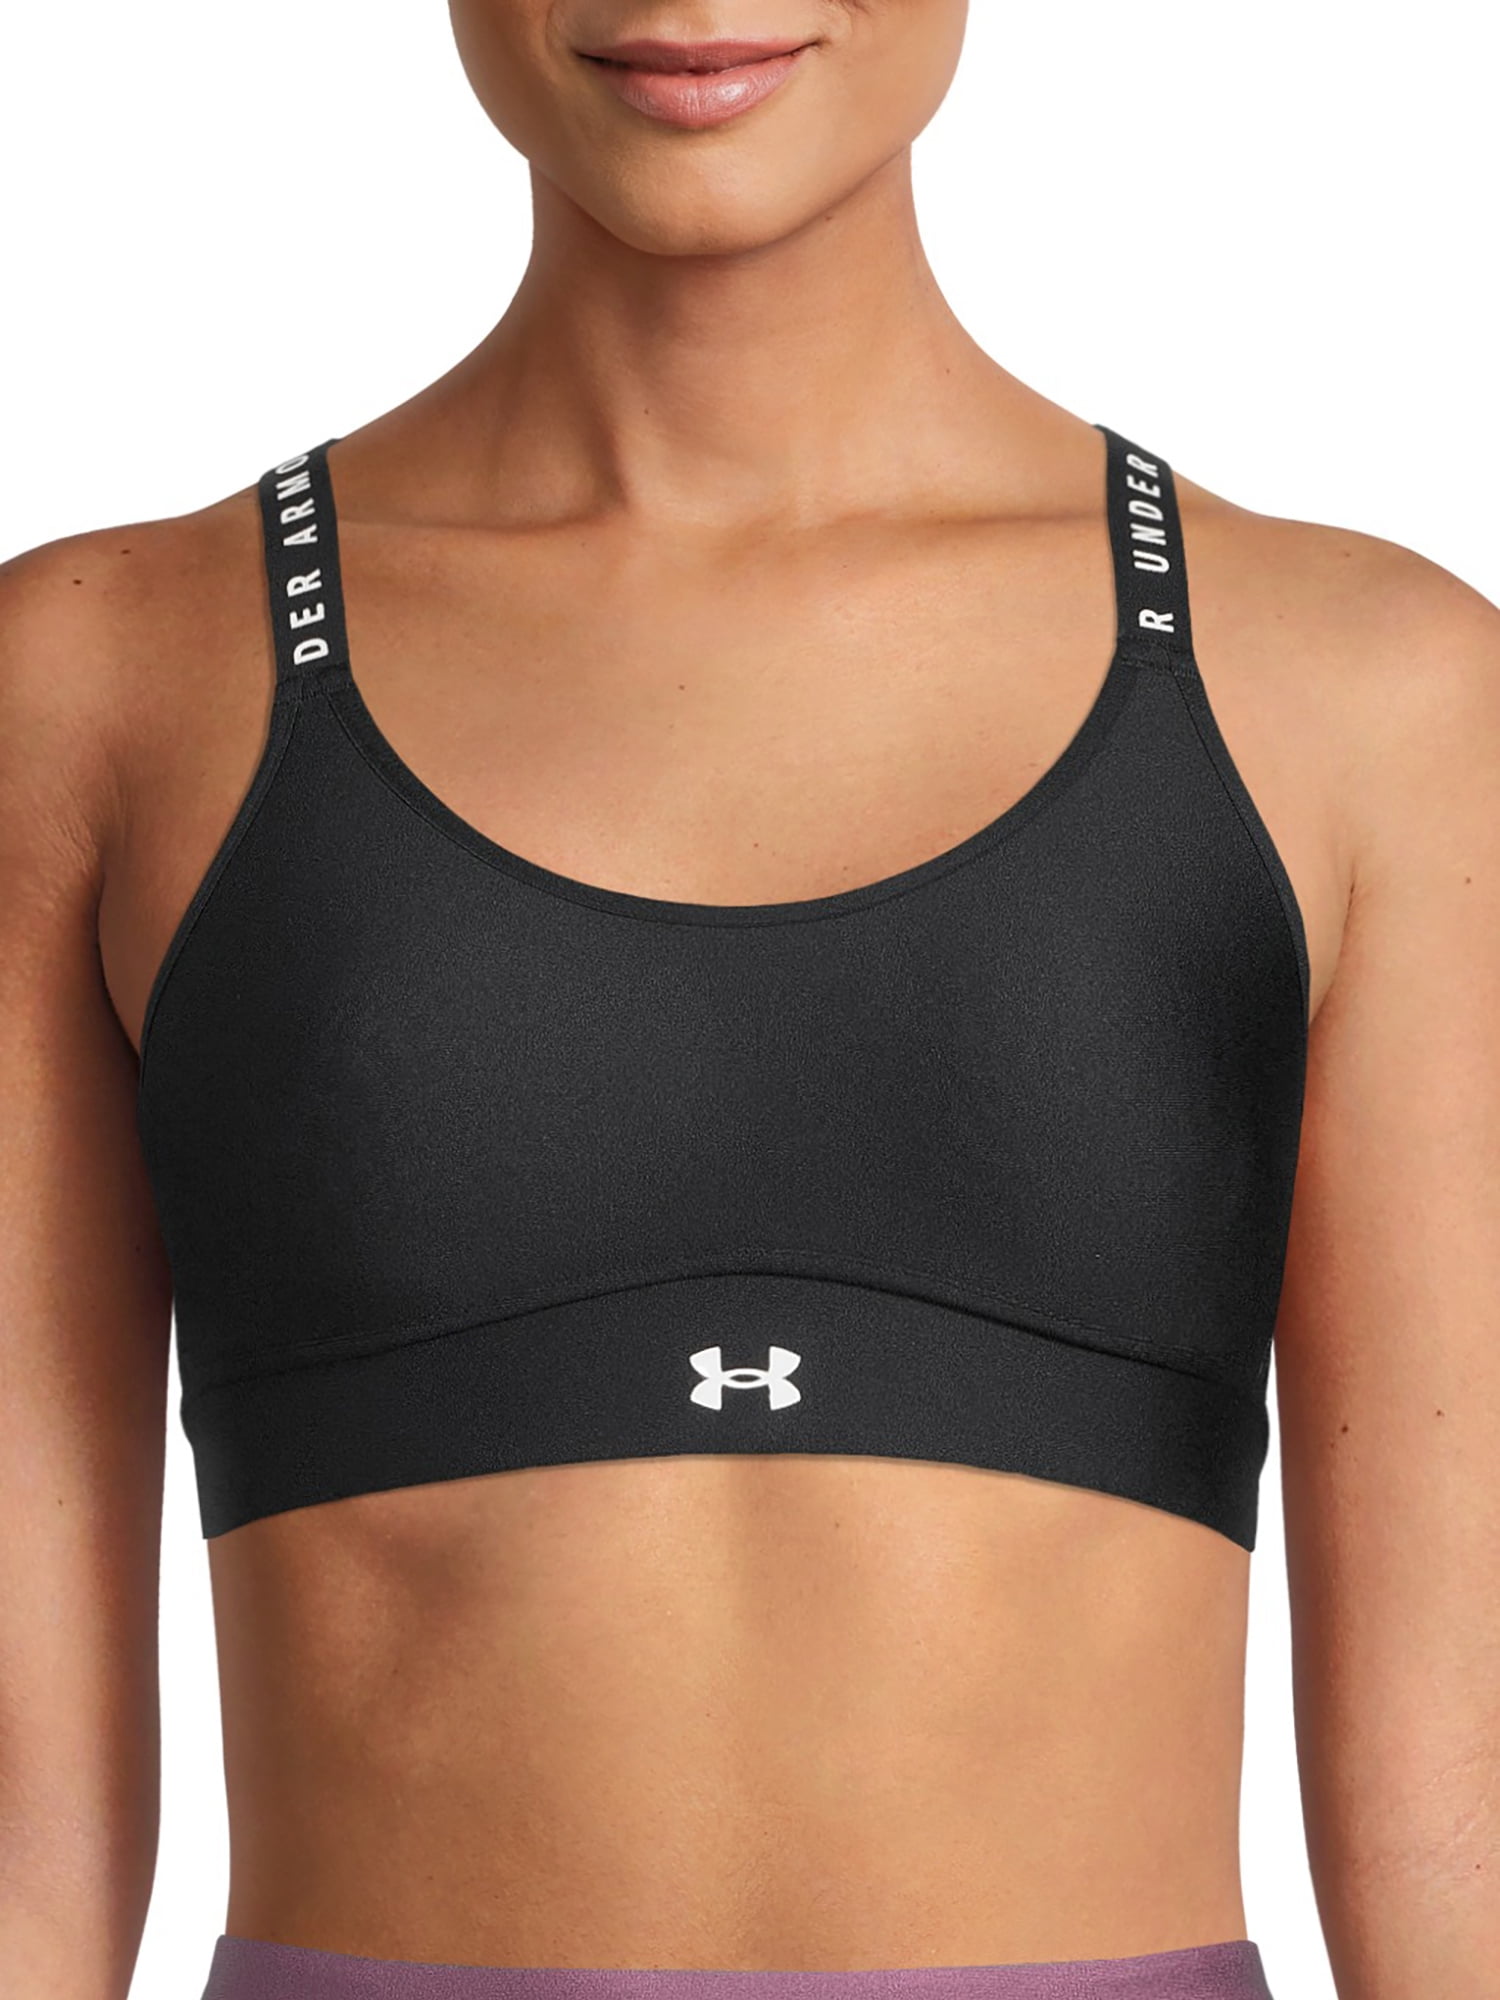 Under Armour Training Infinity mid support sports bra in pink